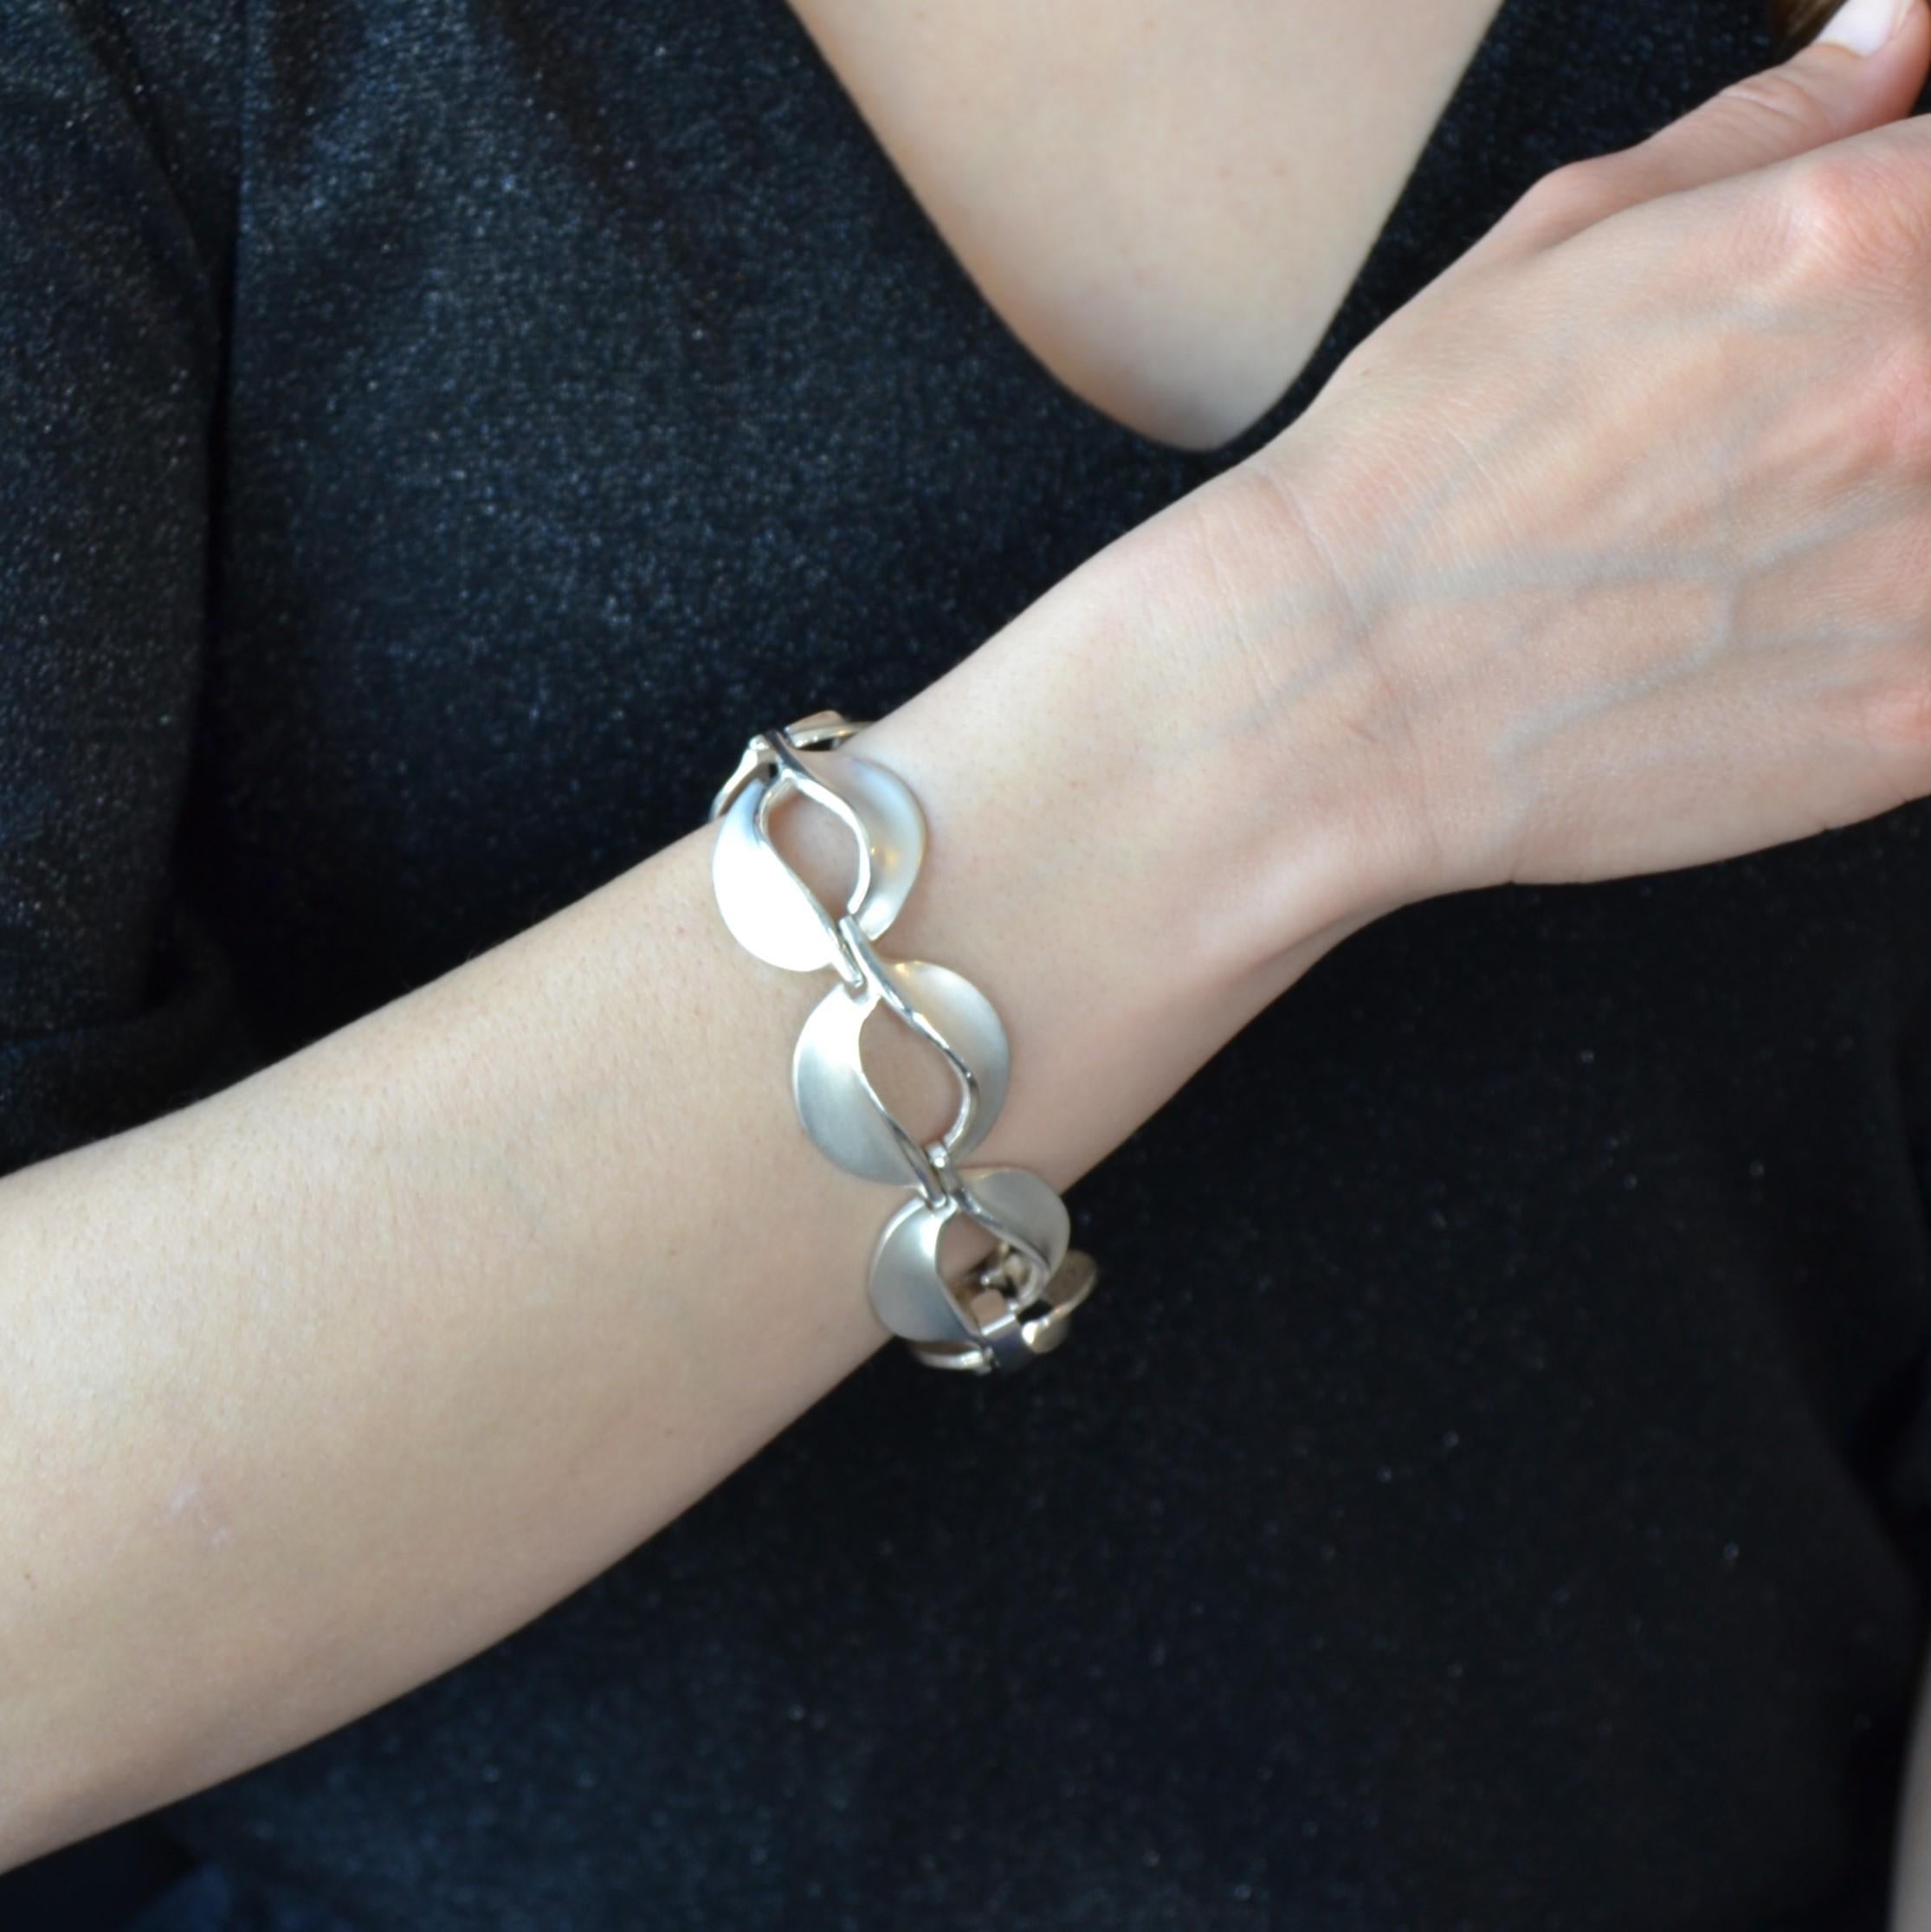 Bracelet in silver.
Magnificent retro bracelet, it is formed of 7 patterns of round shape openwork and articulated between them. The silver is matte on top. The clasp is ratchet.
Length : 19.5 cm approximately, width : 25.5 mm approximately,